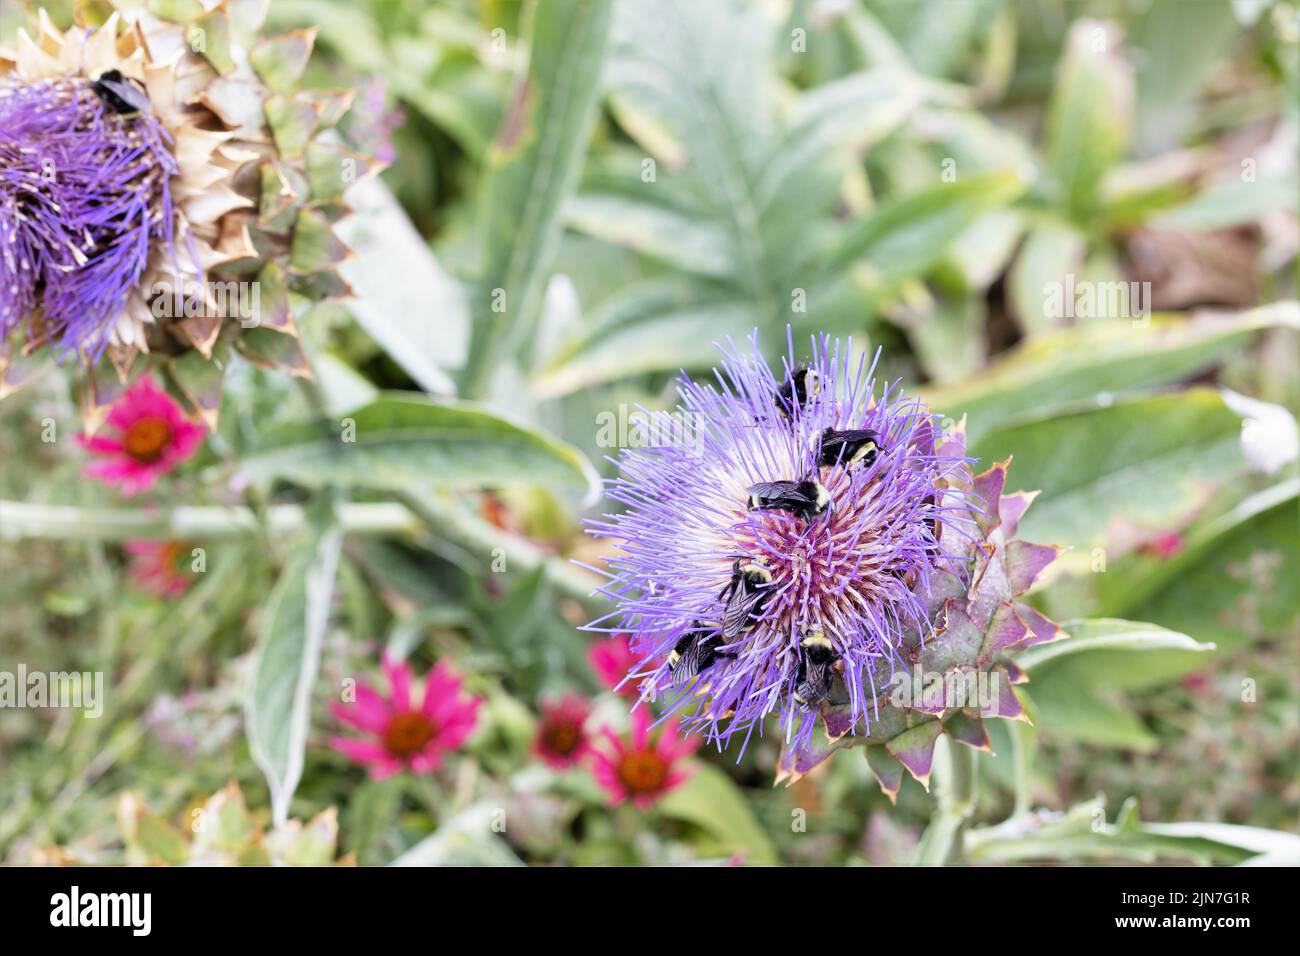 Bees gathering pollen from an artichoke thistle flower. Stock Photo